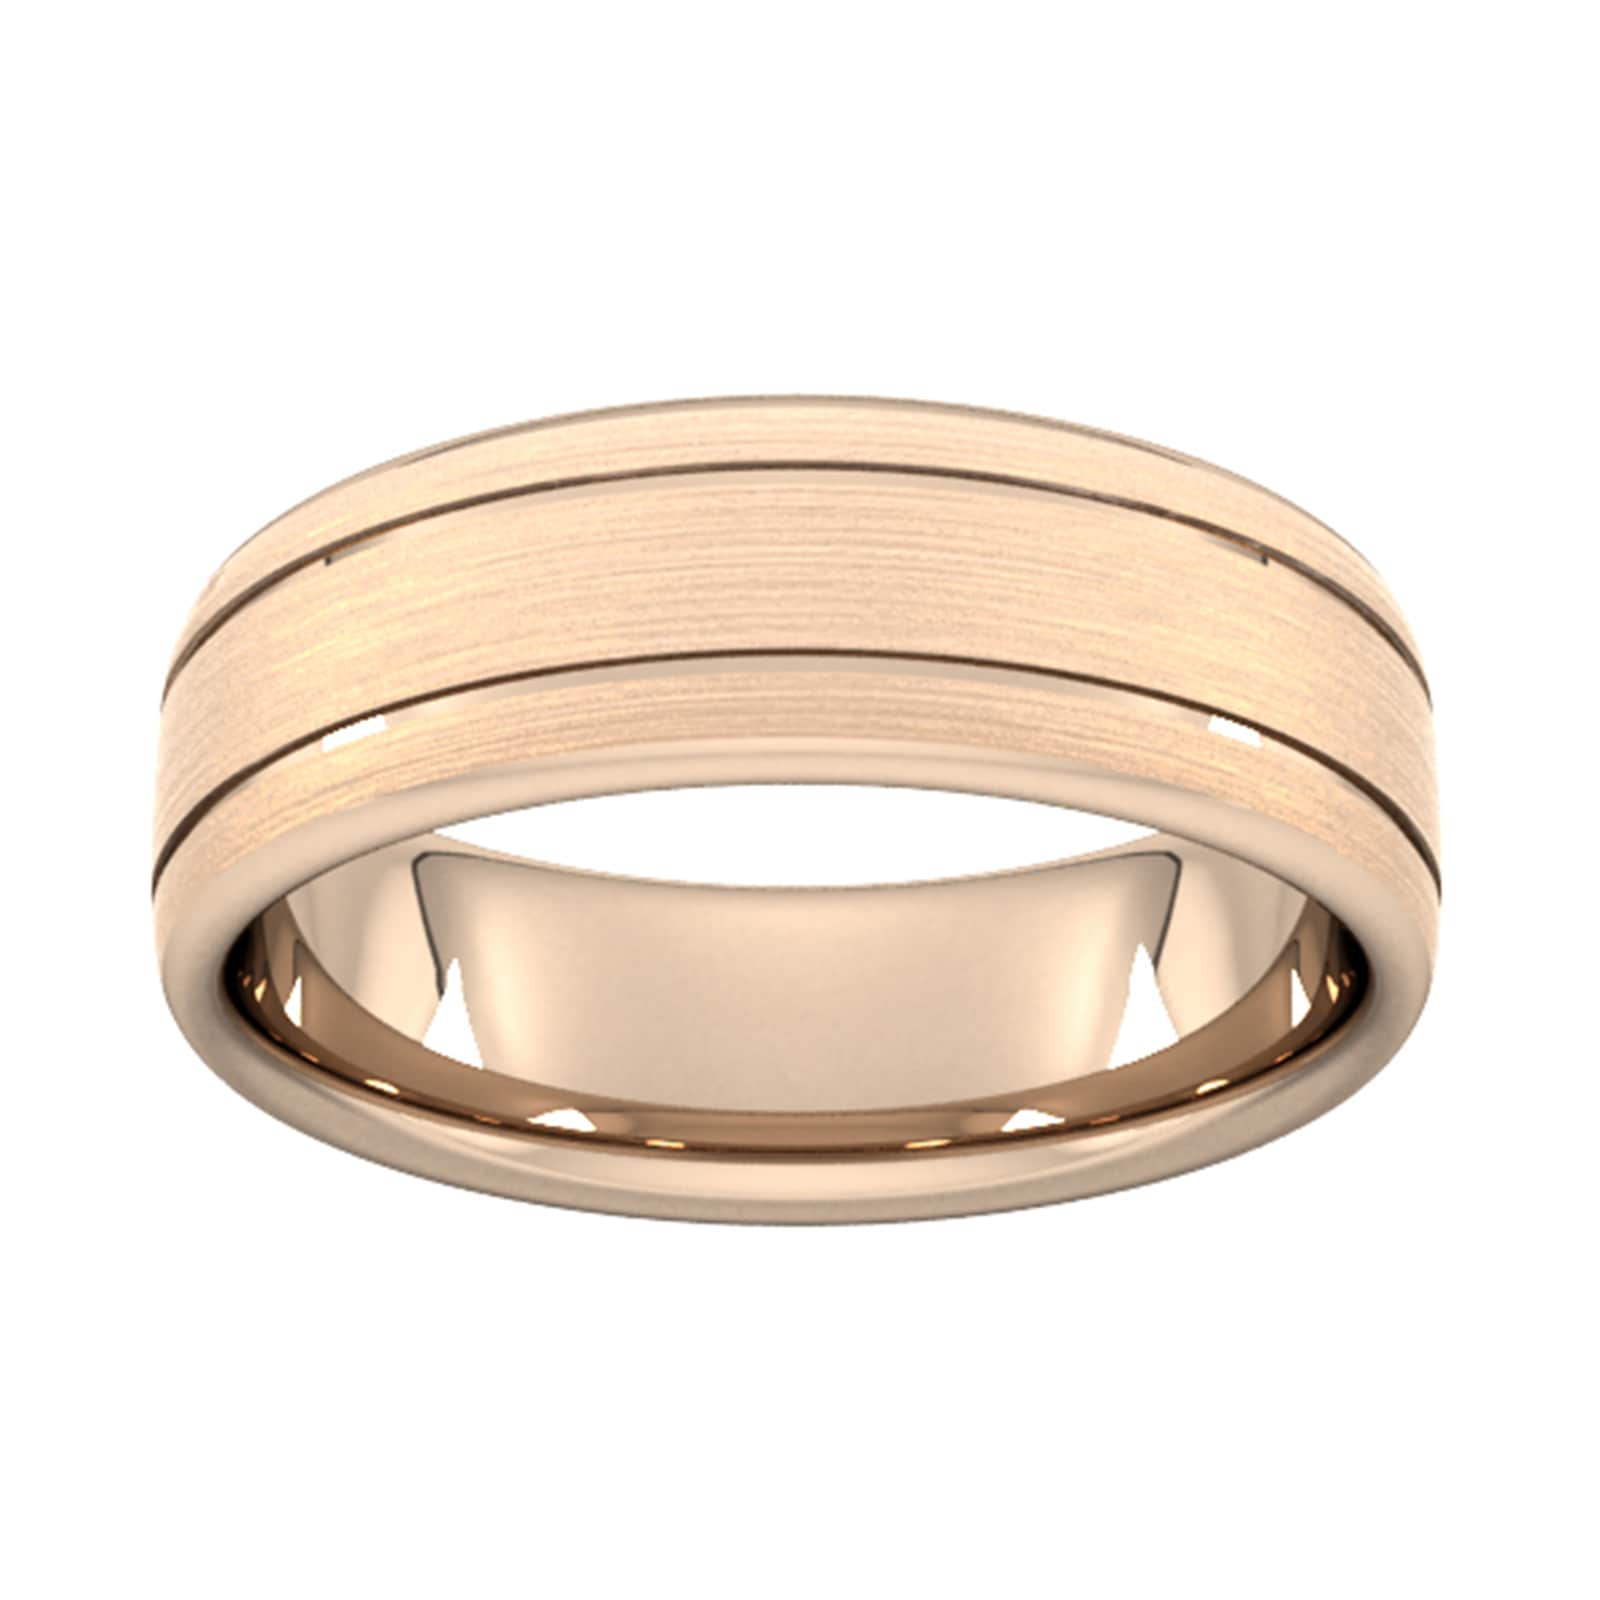 7mm Traditional Court Heavy Matt Finish With Double Grooves Wedding Ring In 18 Carat Rose Gold - Ring Size T